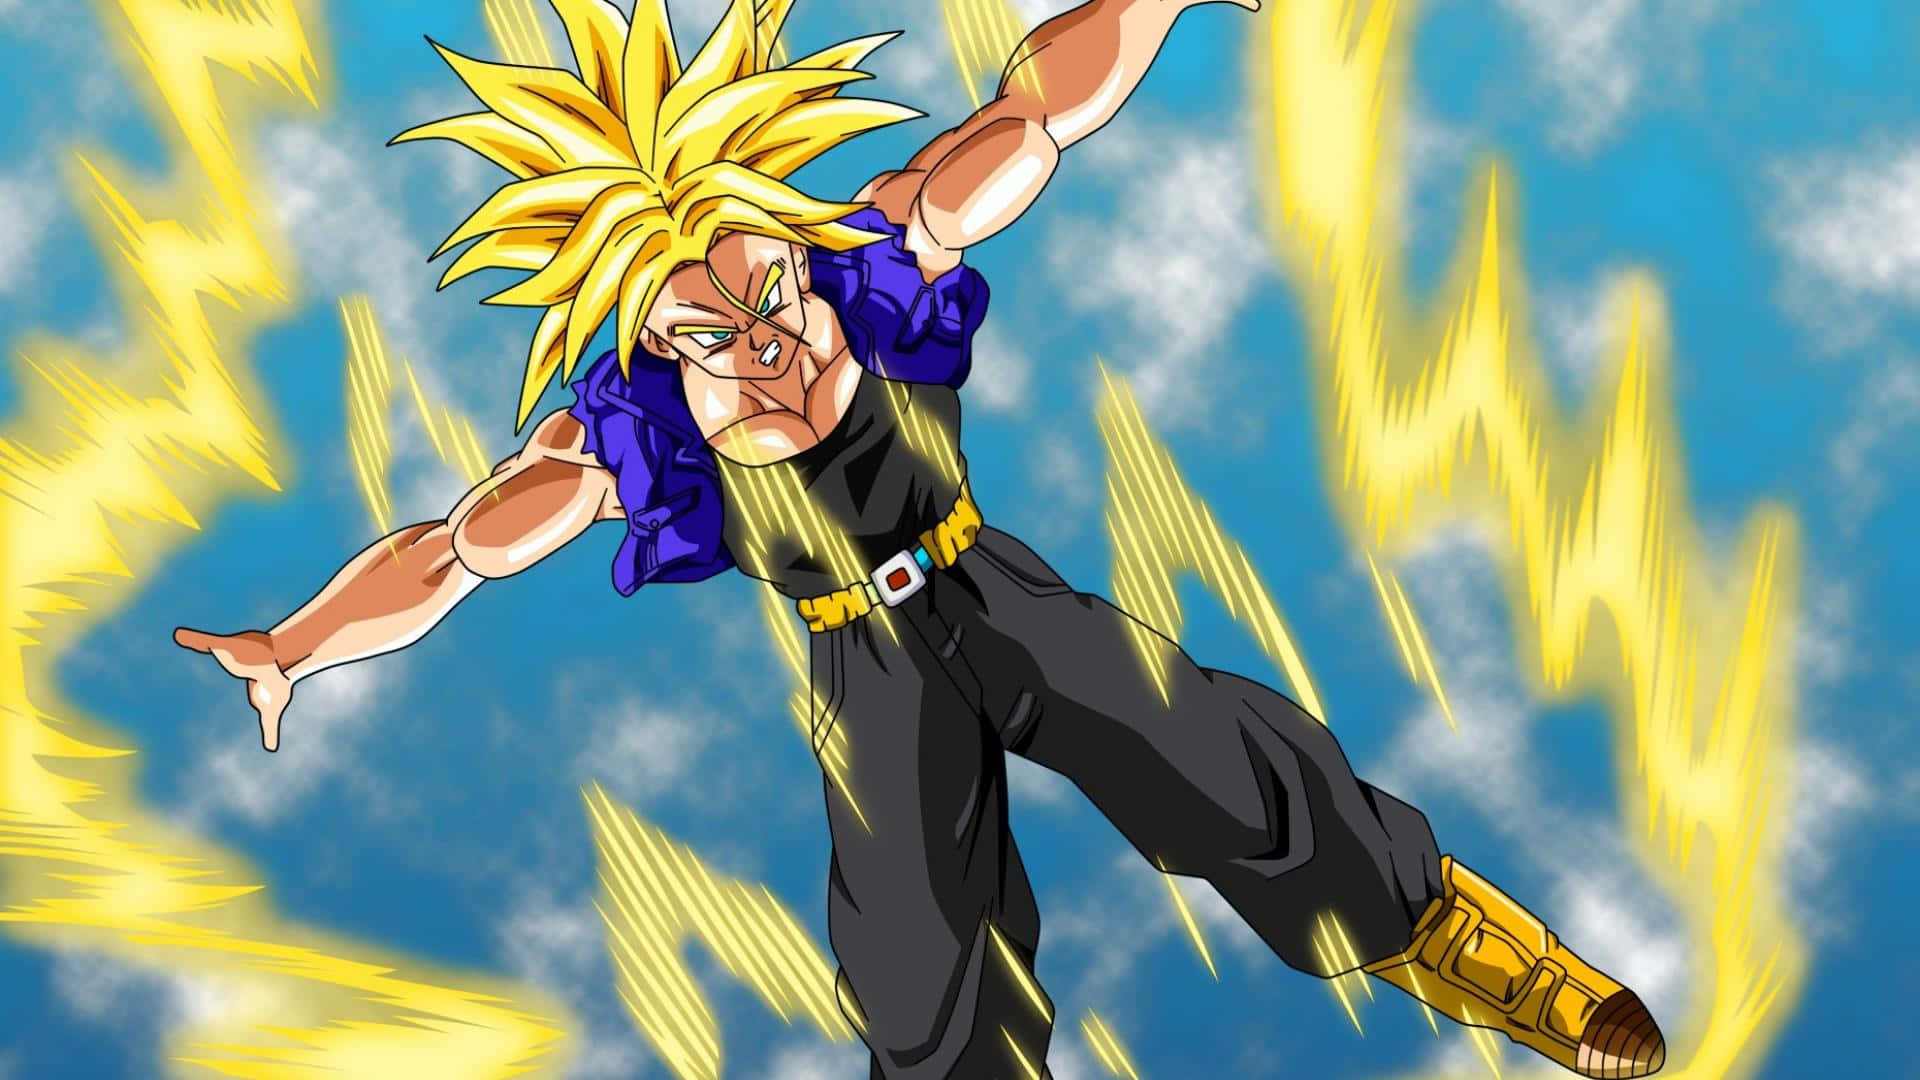 "Trunks, the Saiyan&half human hybrid fighter, defending the Earth with his powerful sword." Wallpaper